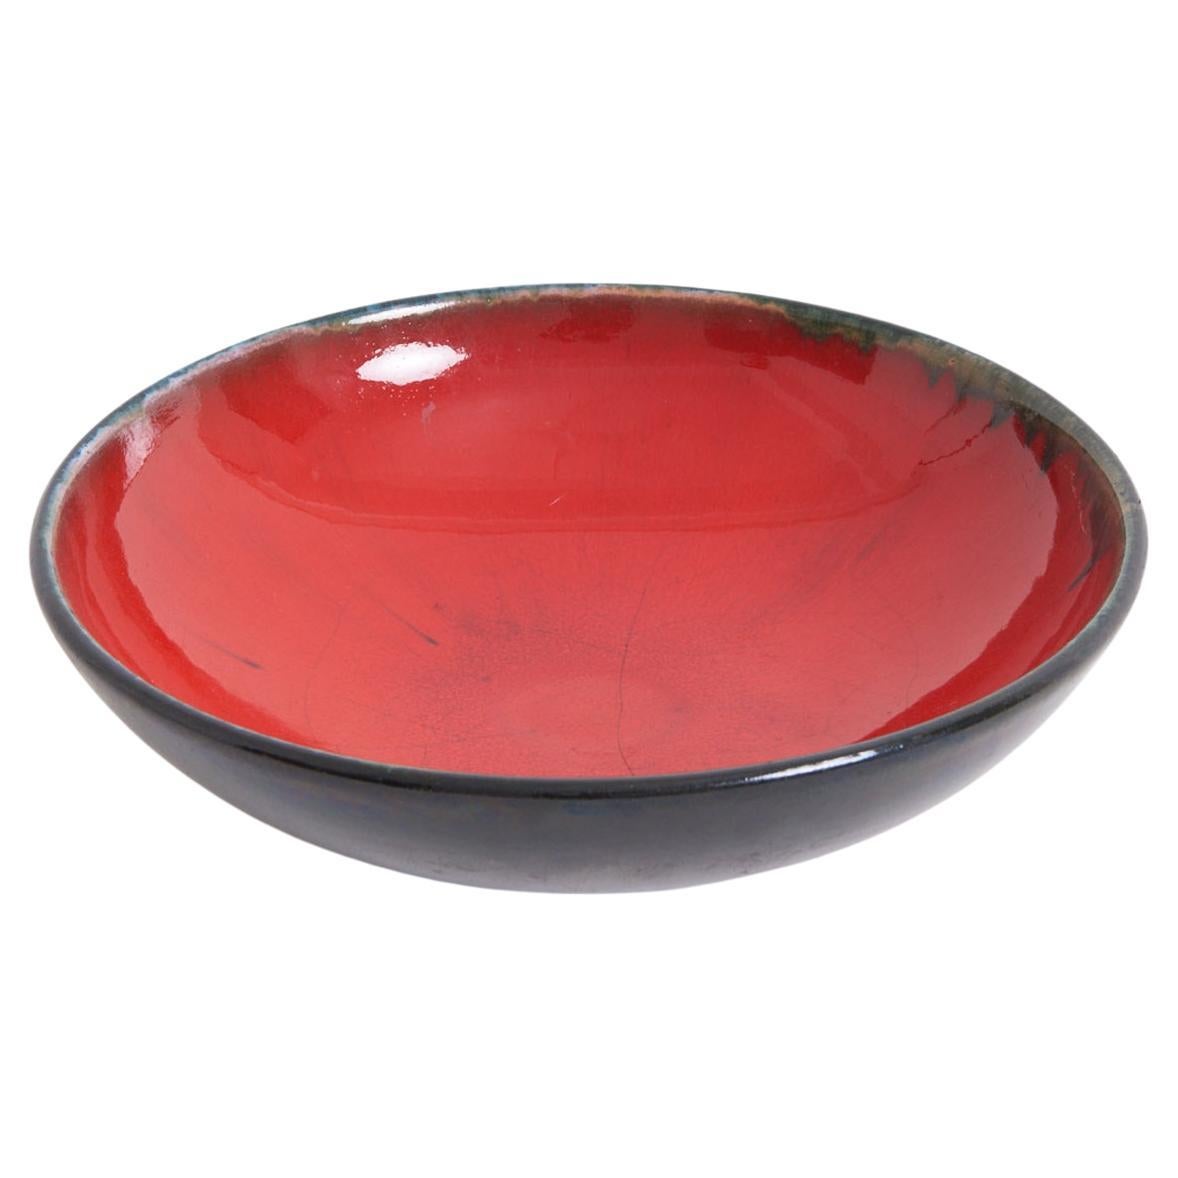 Red Ceramic Bowl by Lifas